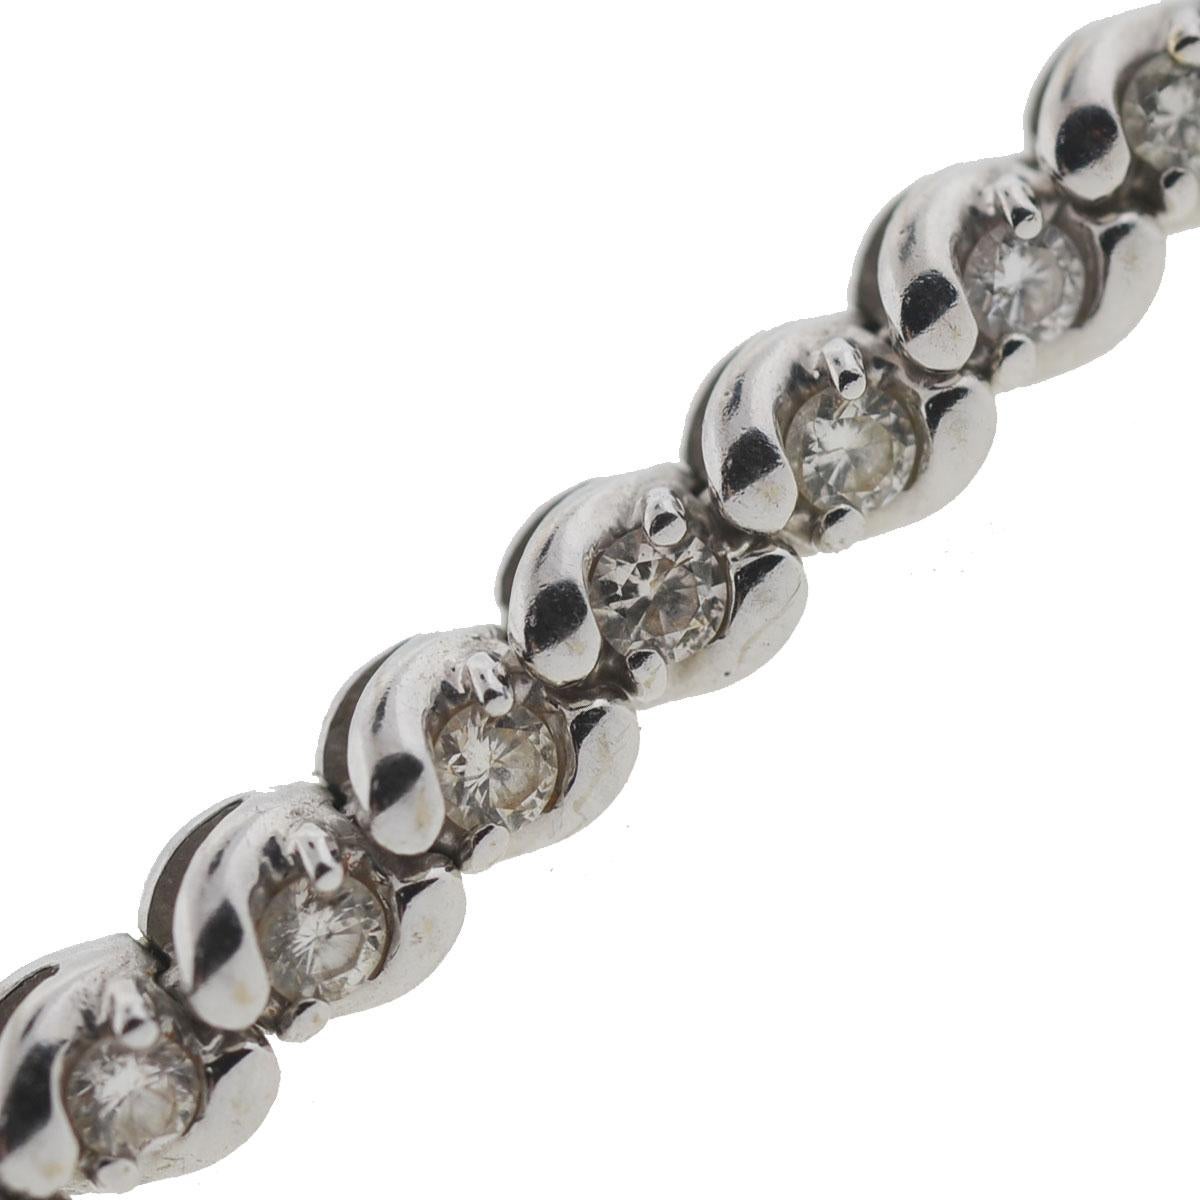 Company-N/A
Style-Tennis Bracelet
Metal-14kt White Gold
Stones-Diamonds, approx. 2.1 cts TW
Bracelet Weight-14.46 grams
Size -Fits Writs 6 3/7